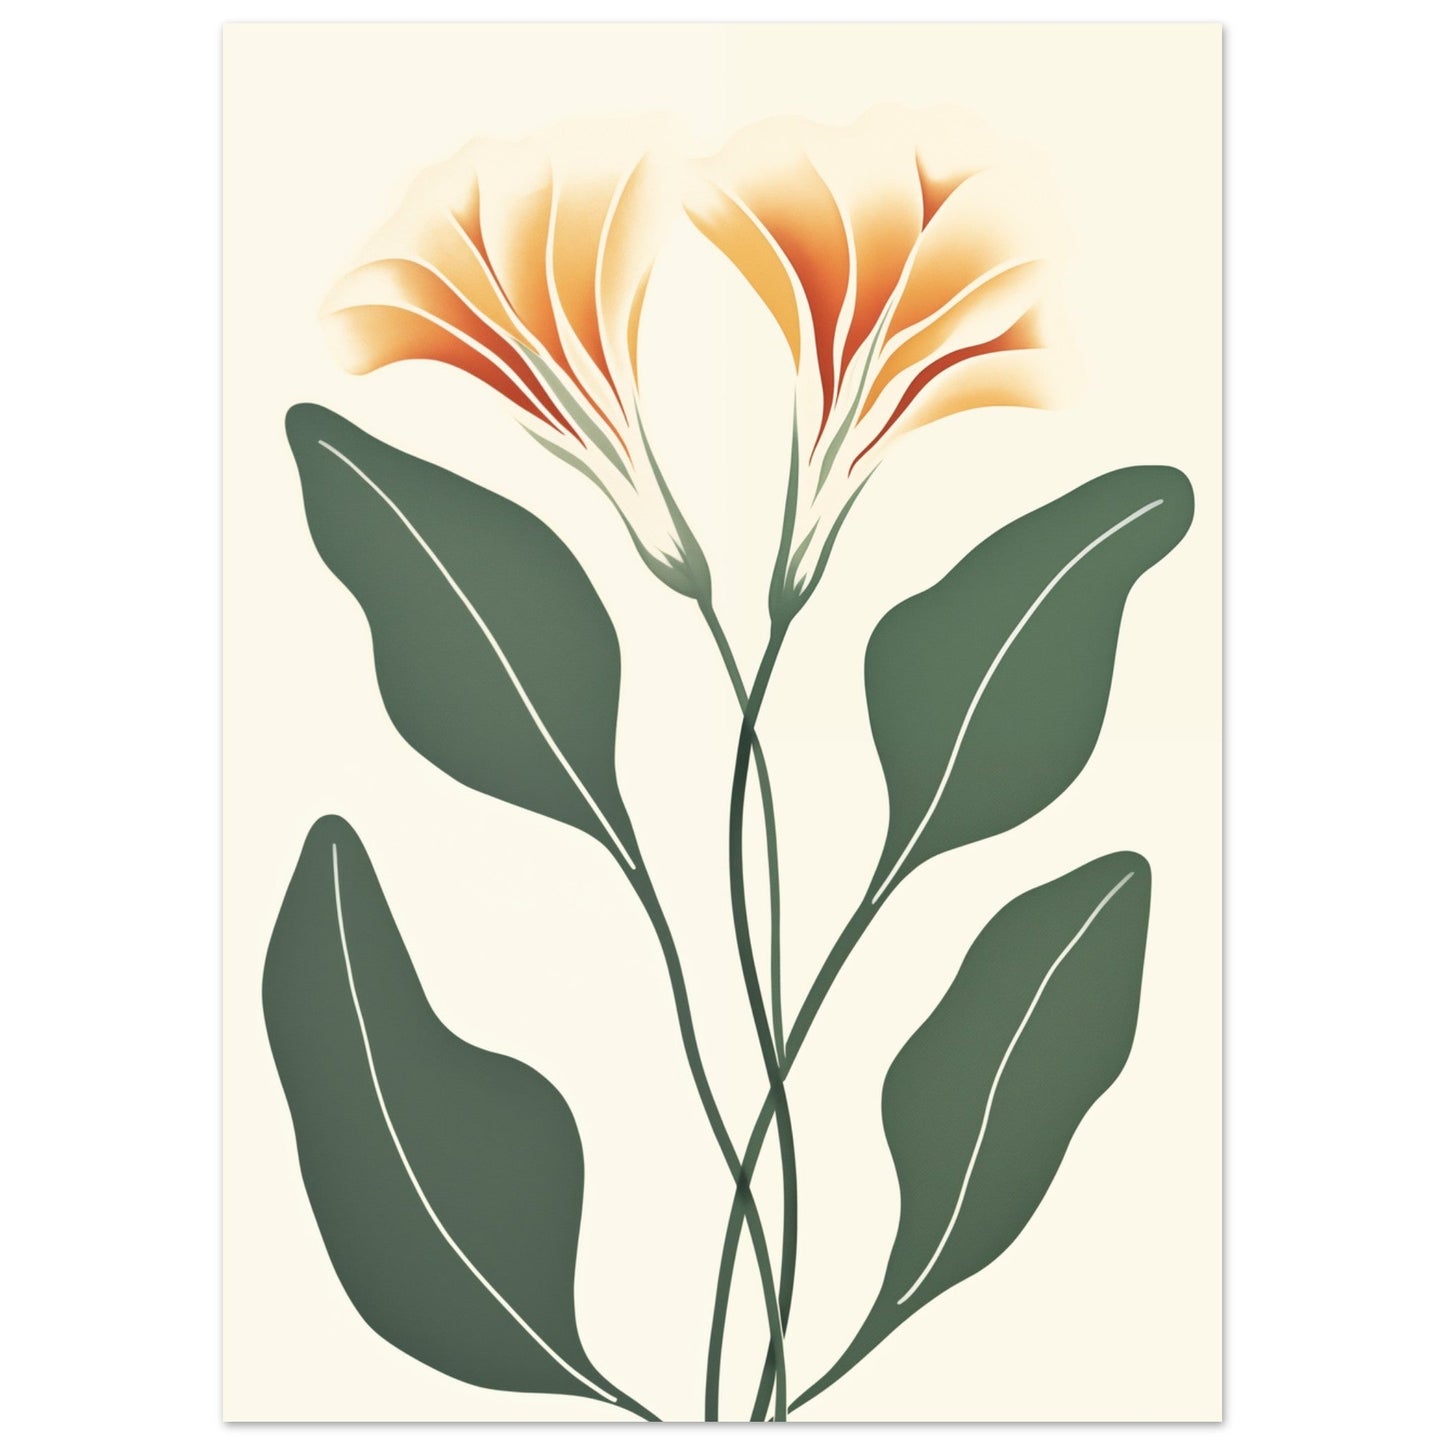 A Floral Fervor with orange flowers and leaves on a beige background, perfect for adding color to any room.